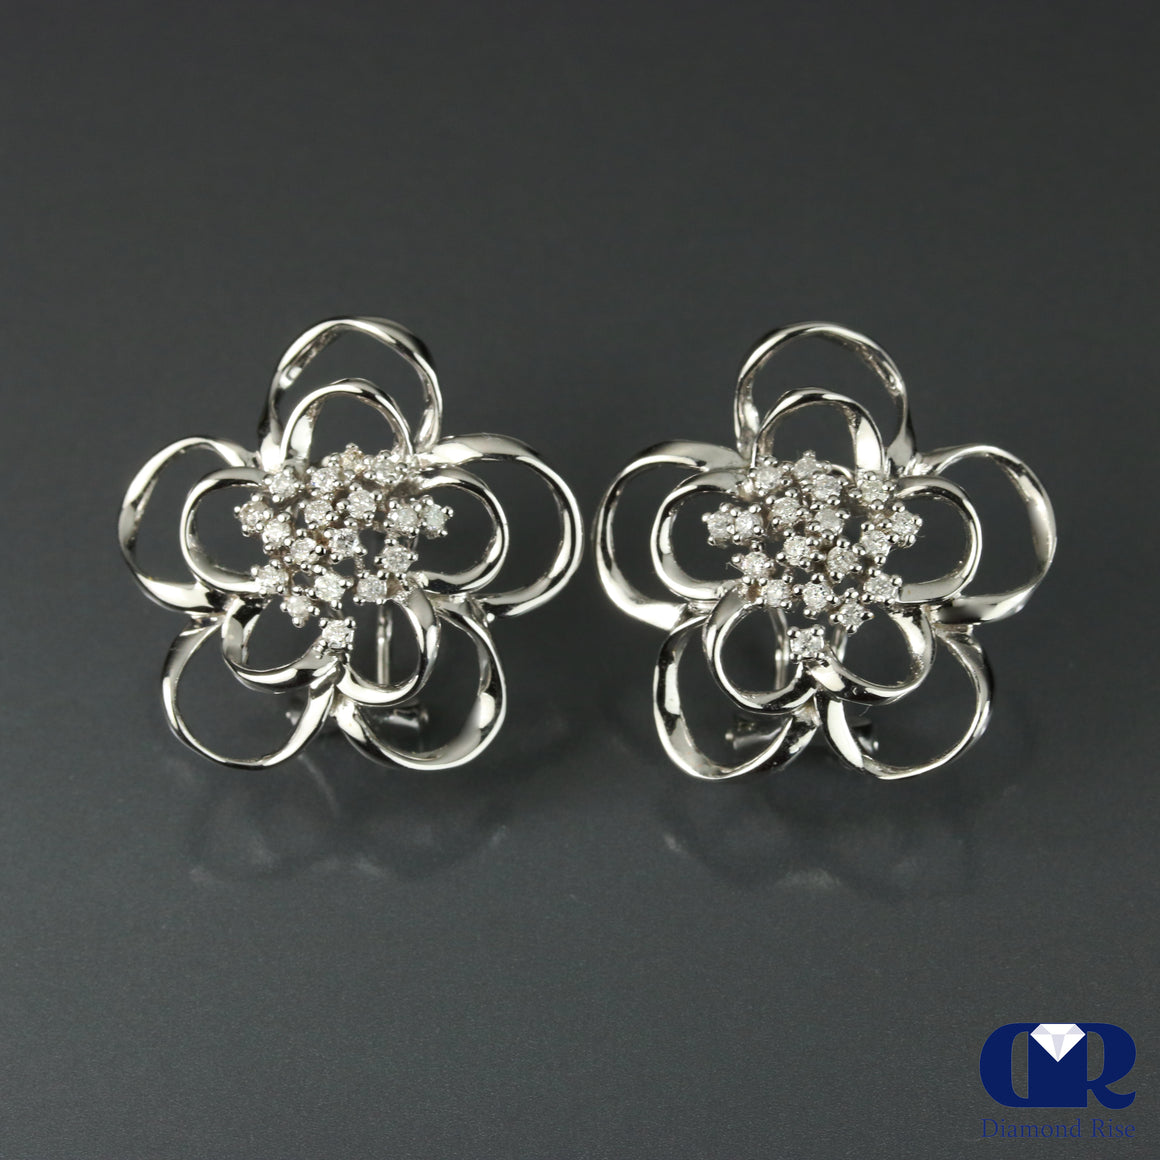 Diamond Floral Style Earrings In 14K White With Lever Back - Diamond Rise Jewelry